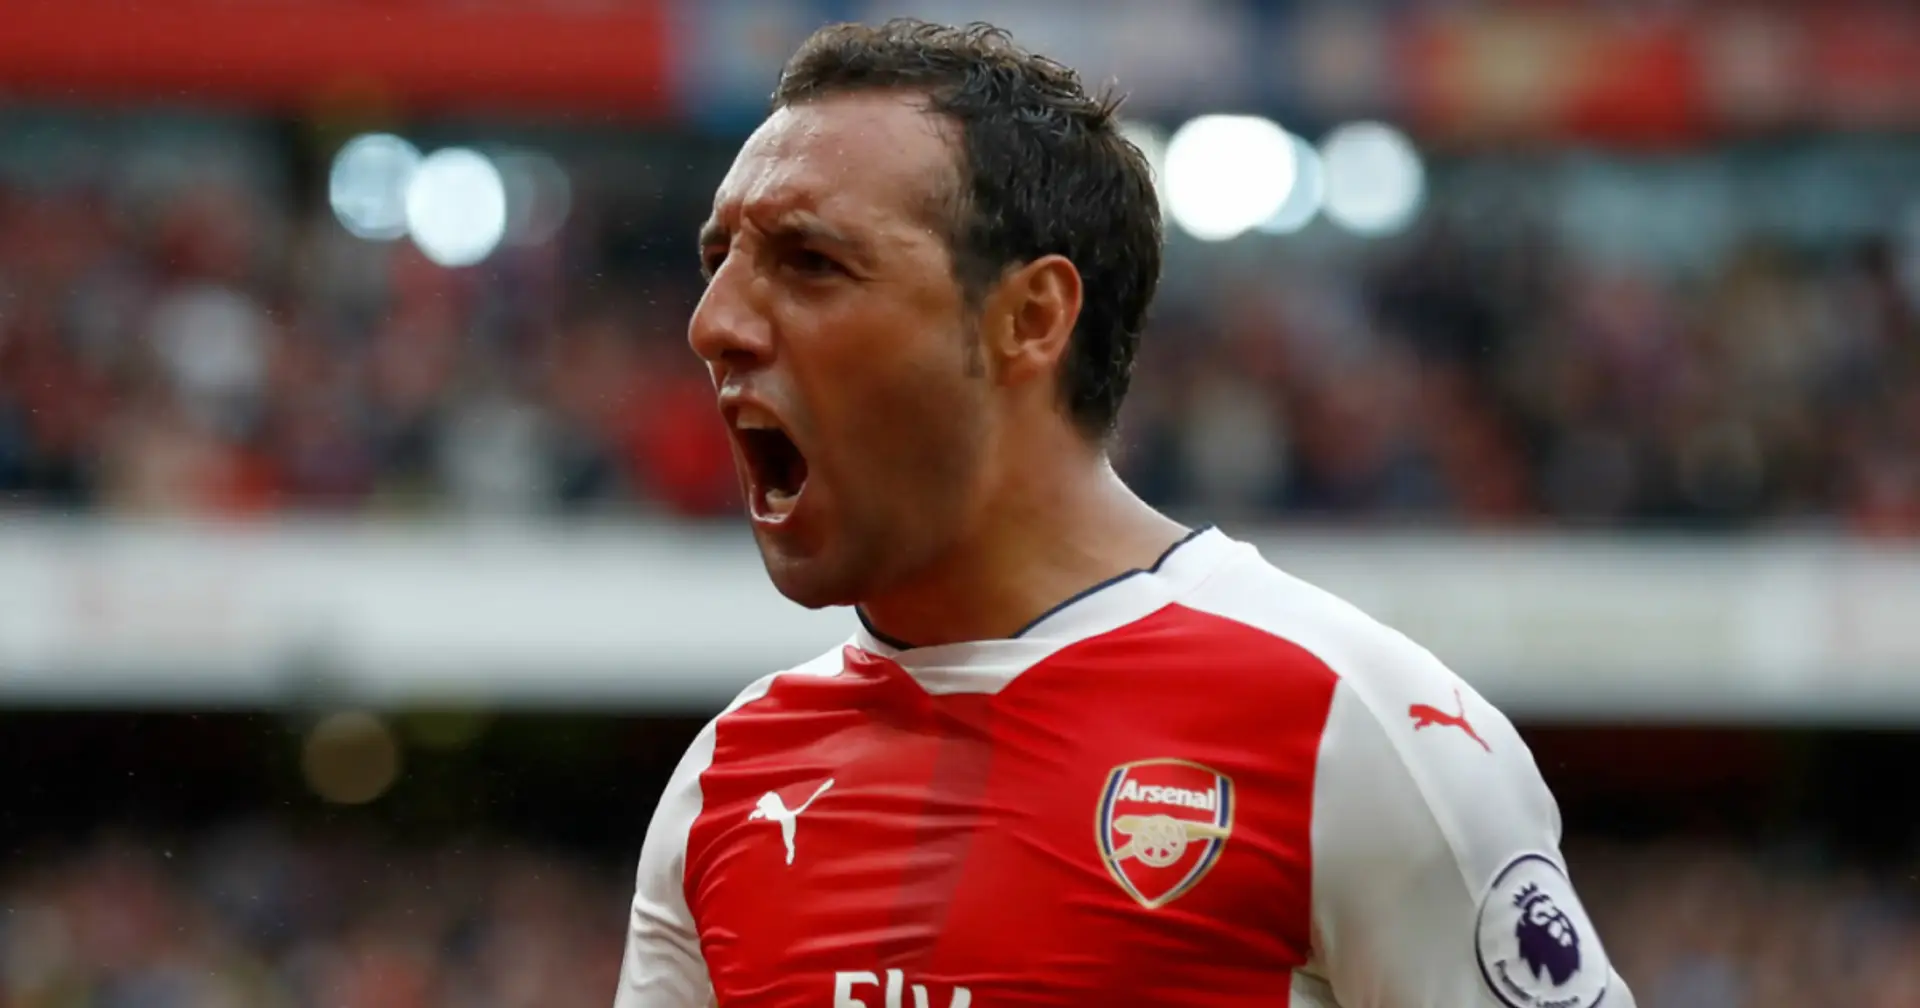 Santi Cazorla is one of the highest-rated players in PL & 2 more under-radar Arsenal stories 